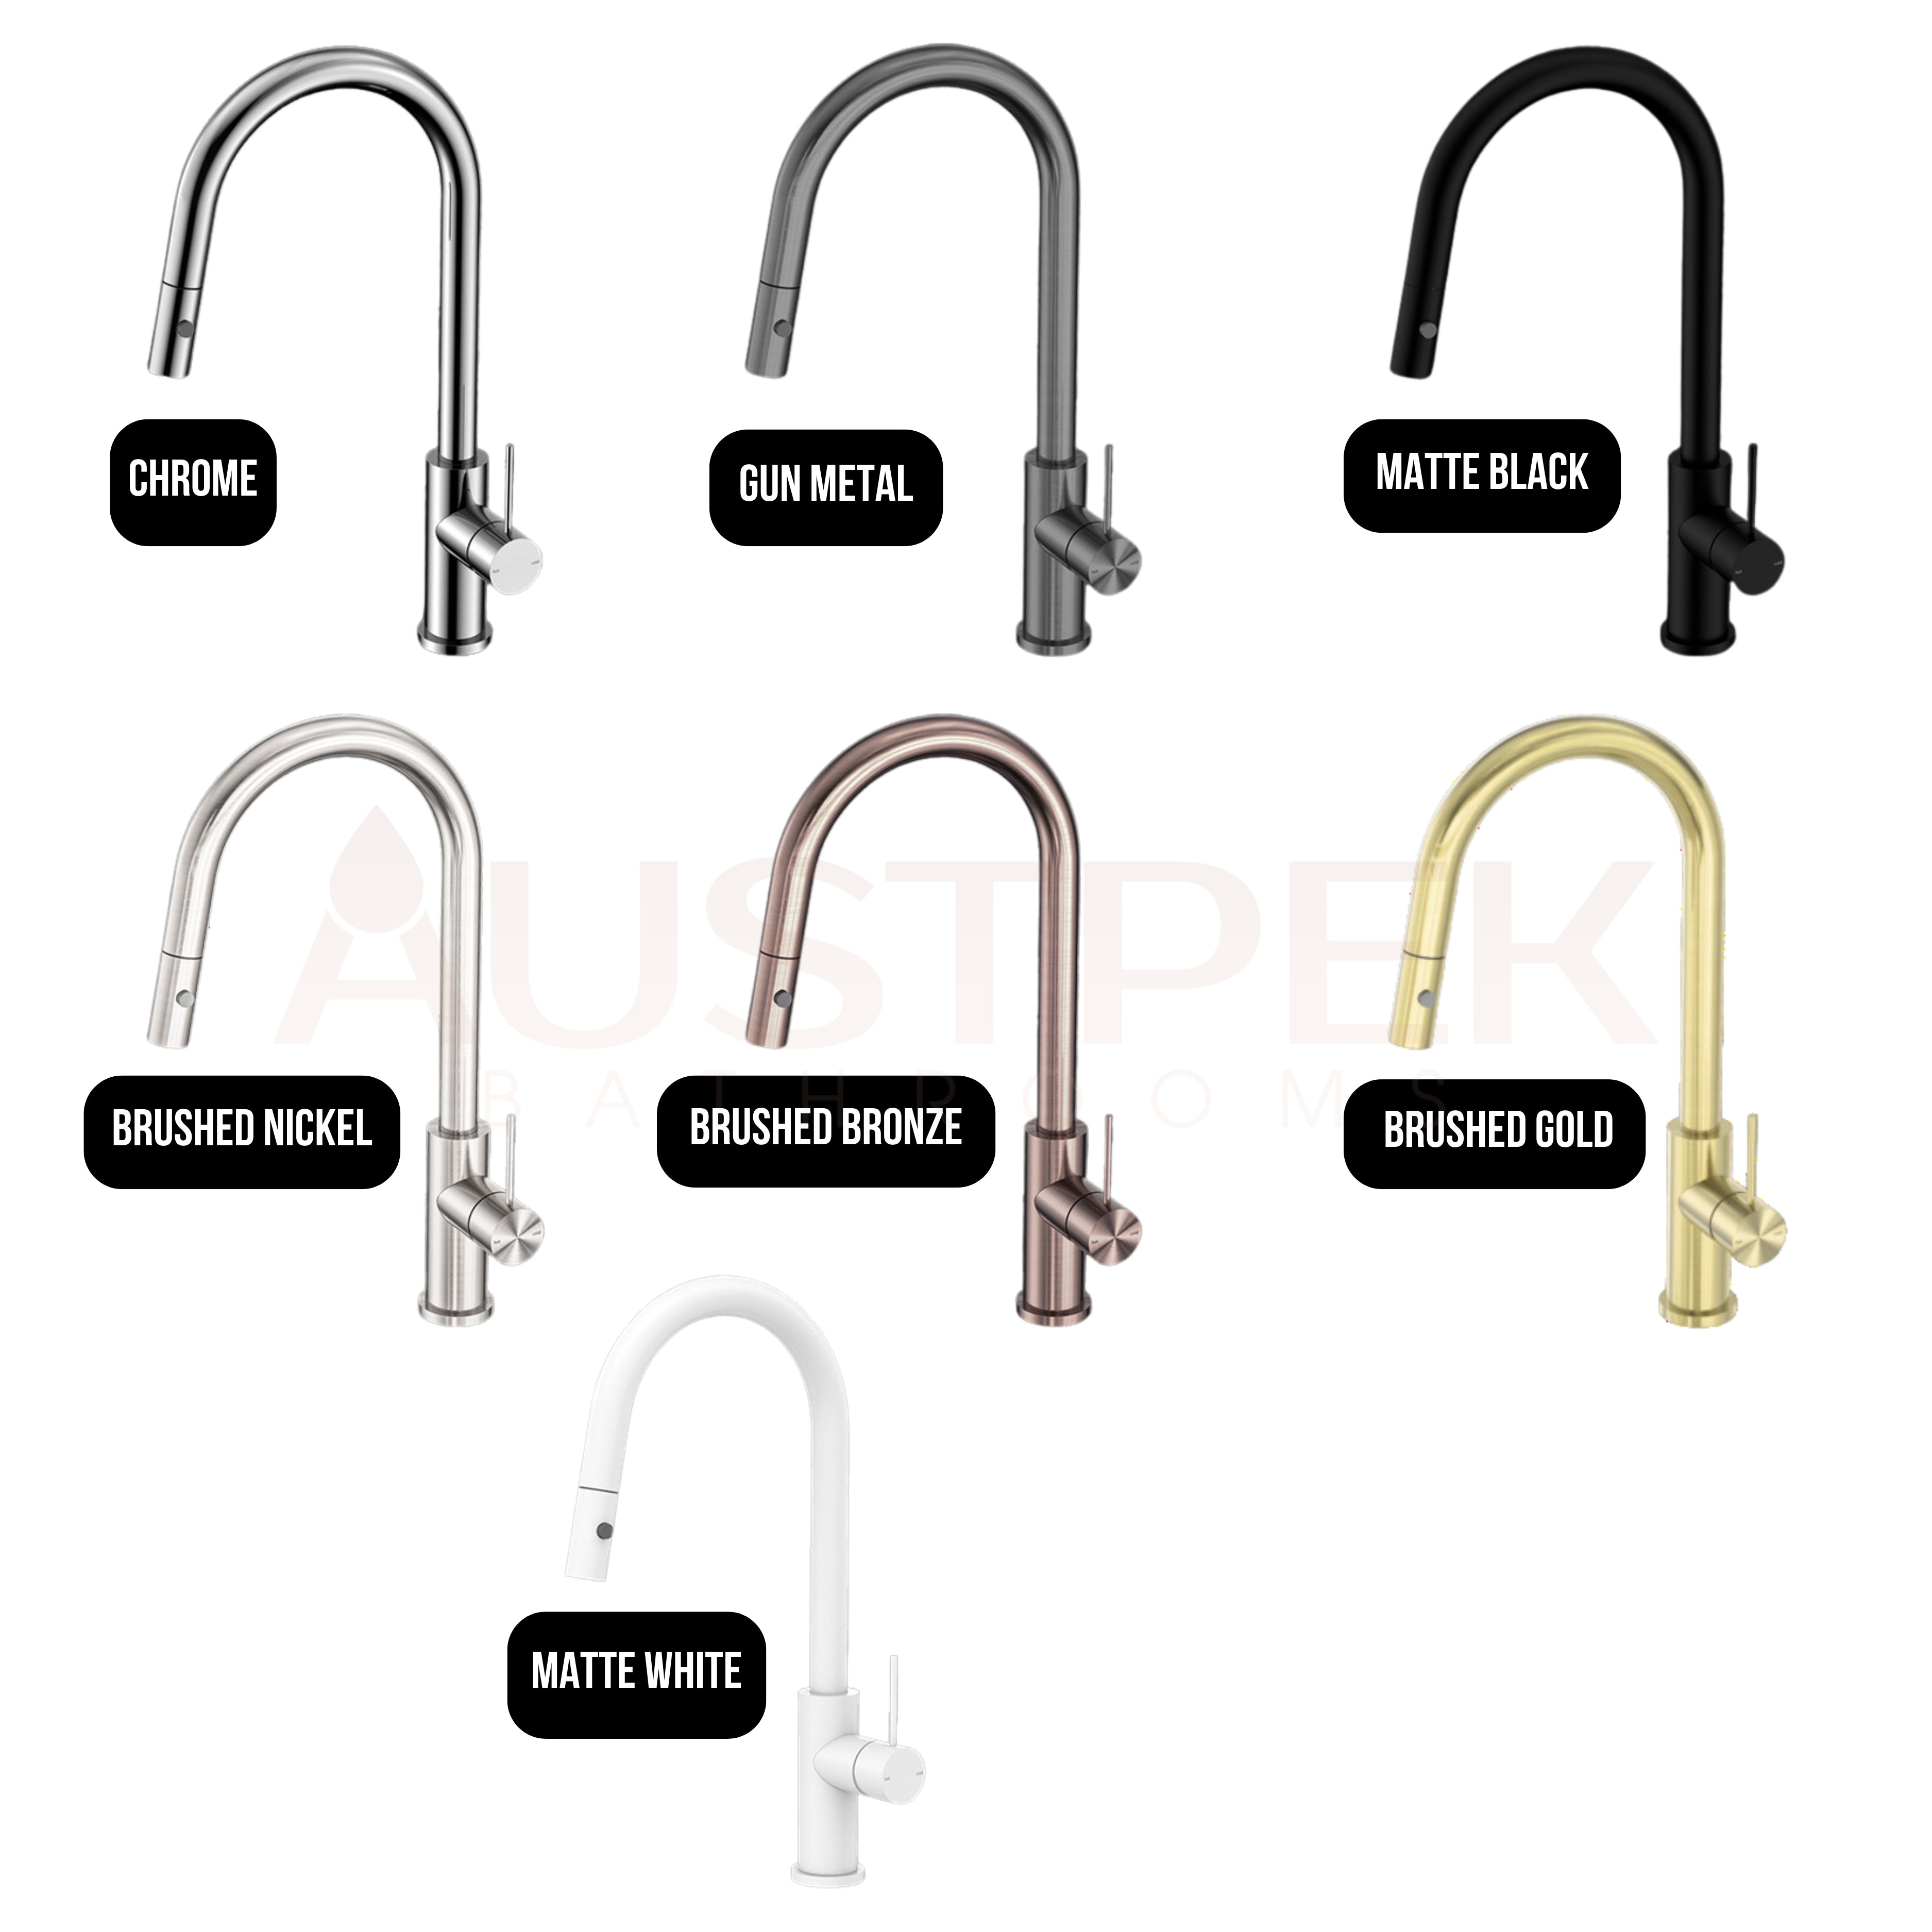 NERO MECCA PULL OUT SINK MIXER WITH VEGIE SPRAY BRUSHED BRONZE